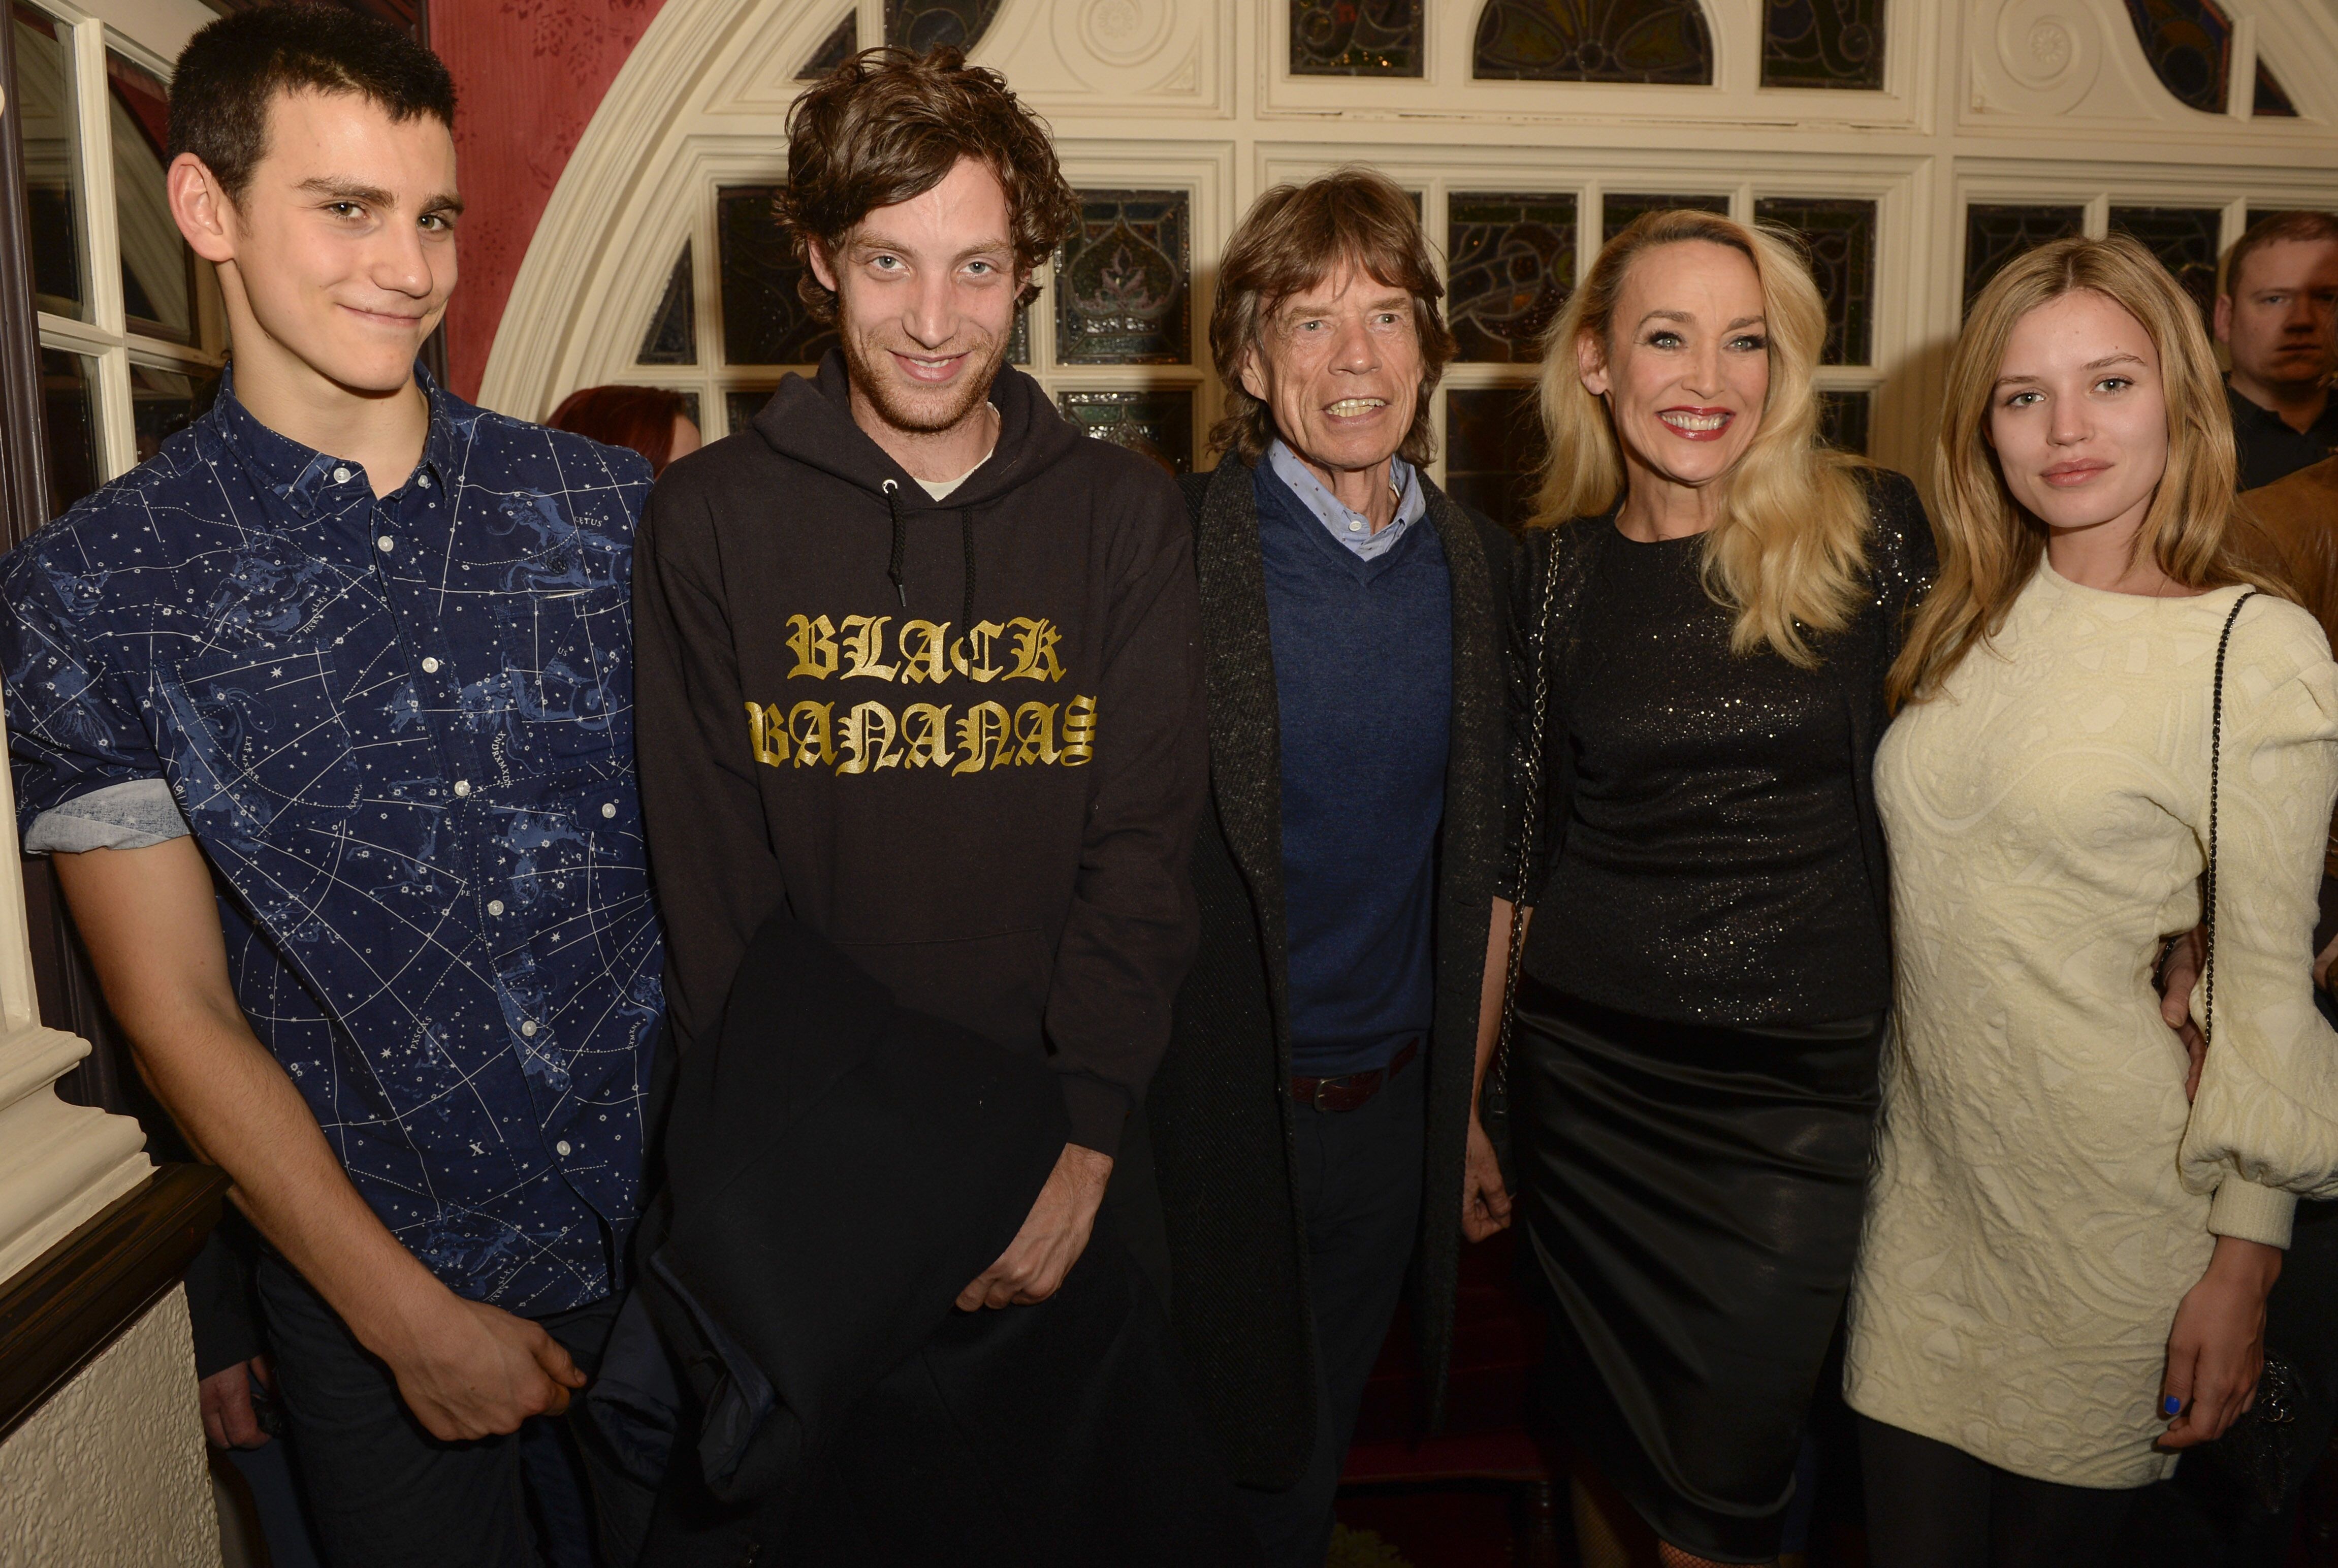 Gabriel Jagger, James Jagger, Sir Mick Jagger, Jerry Hall and Georgia May Jagger attend the press night performance of "Snow White And The Seven Dwarfs." | Source: Getty Images